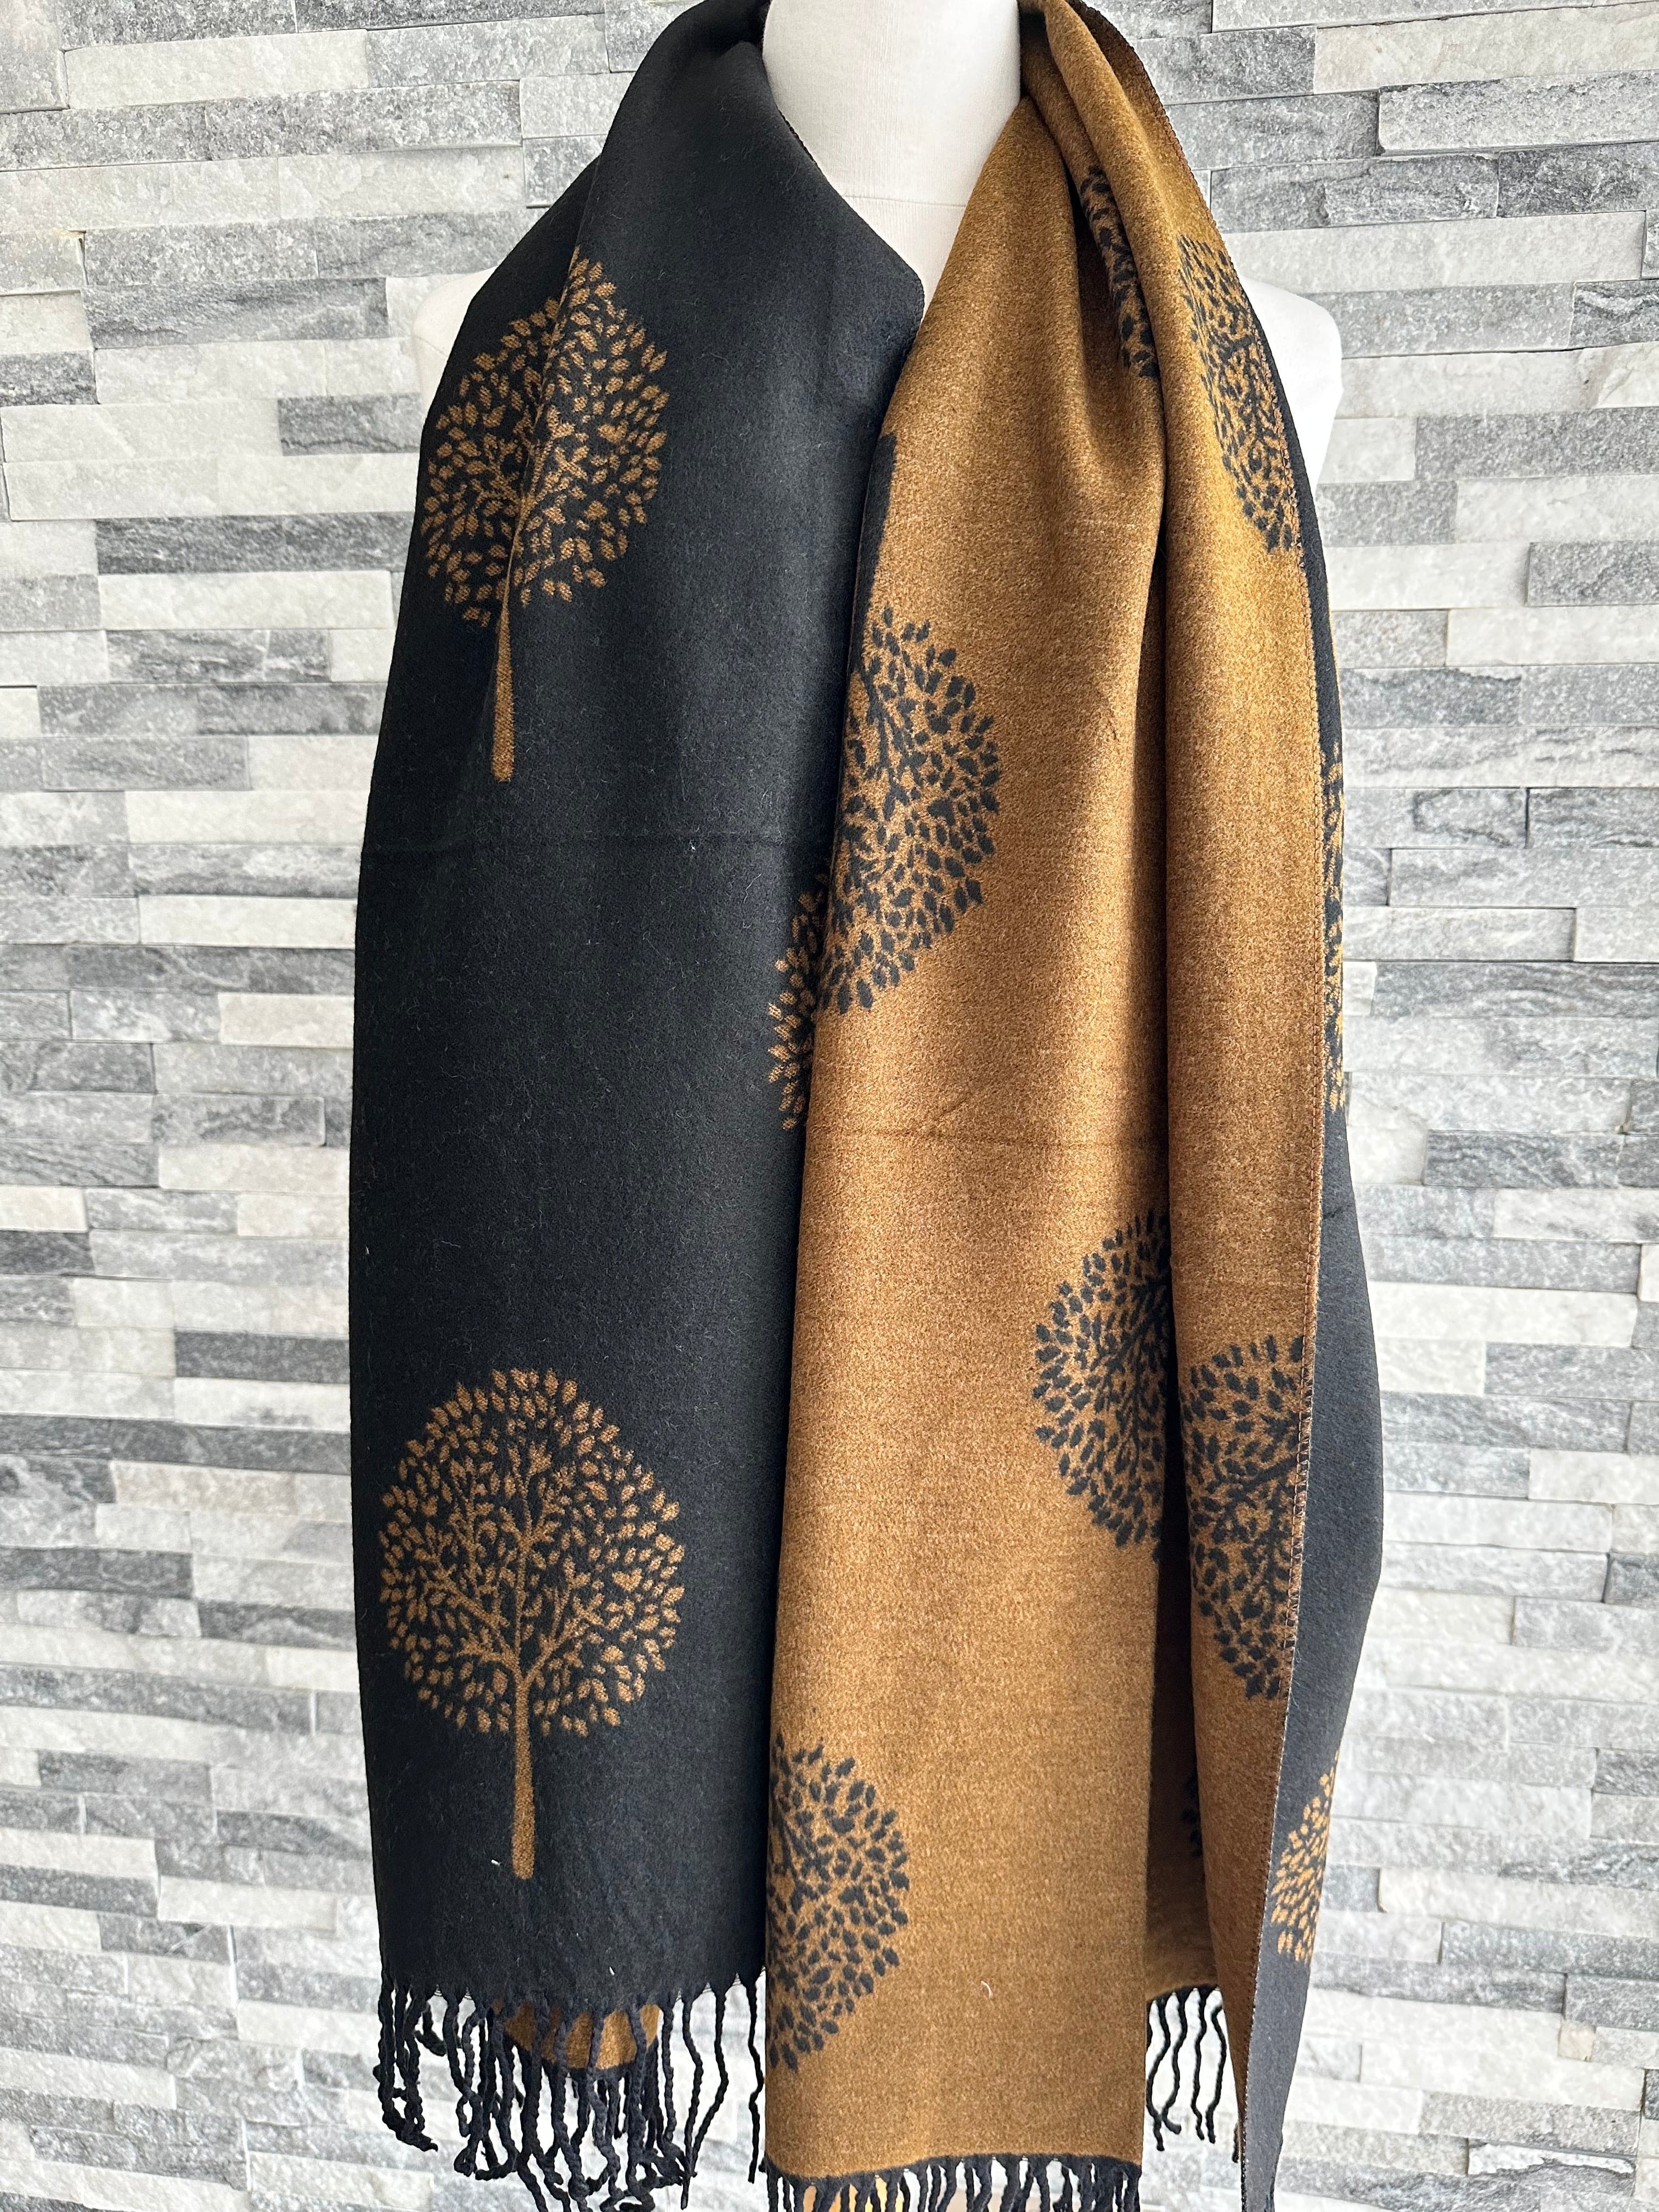 lusciousscarves Black and Brown Reversible Mulberry Tree Scarf / Wrap , Cashmere Blend